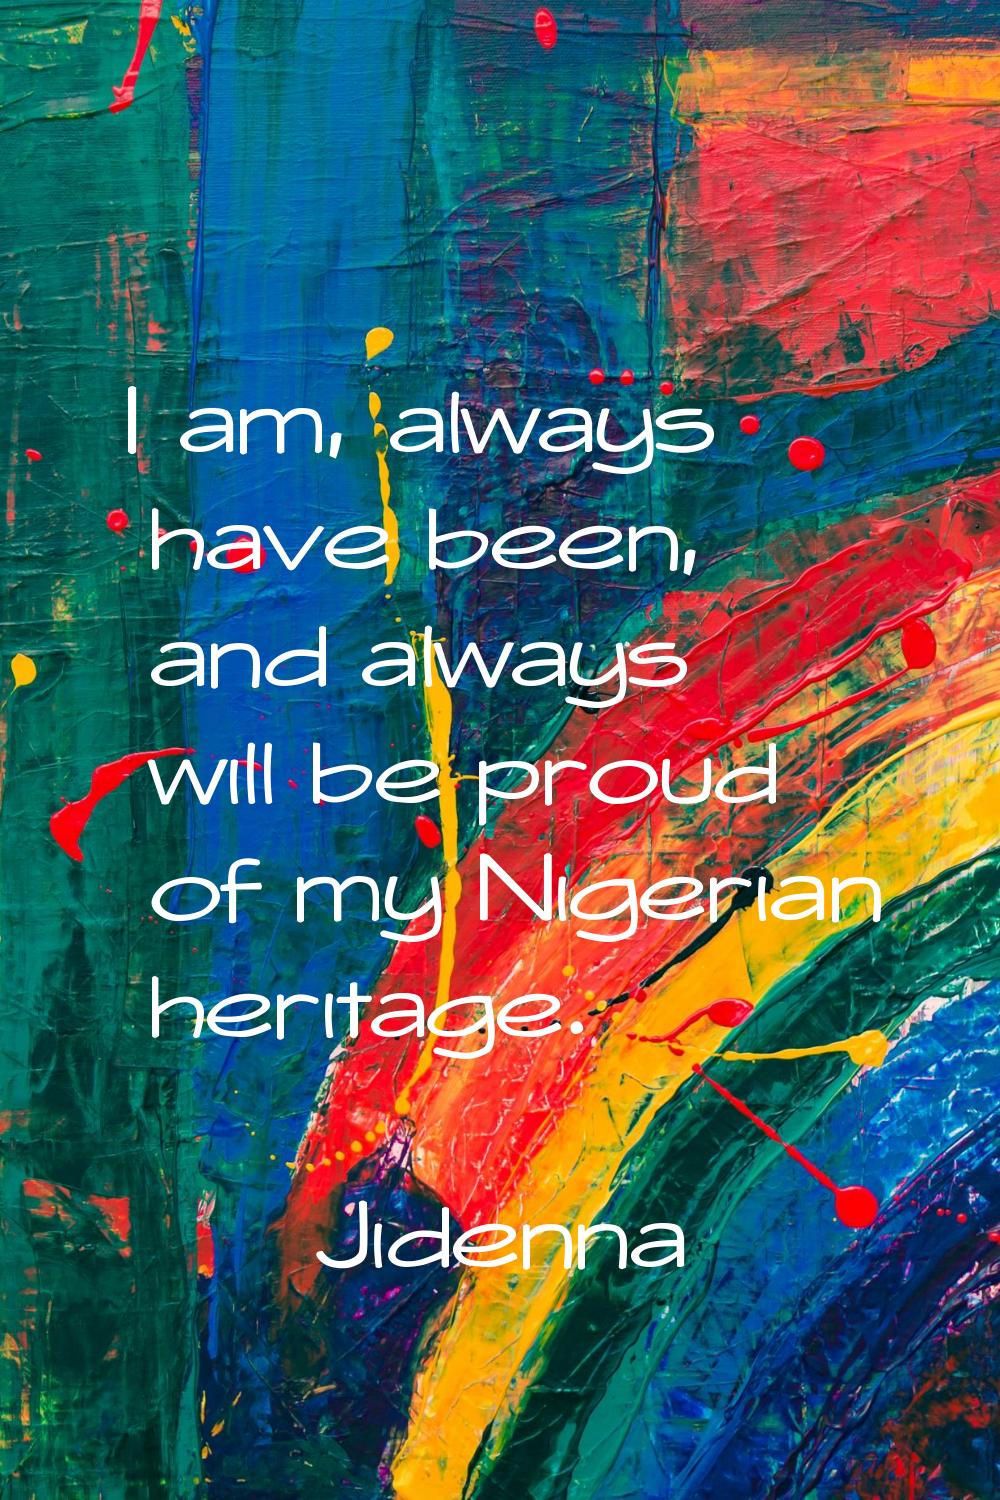 I am, always have been, and always will be proud of my Nigerian heritage.